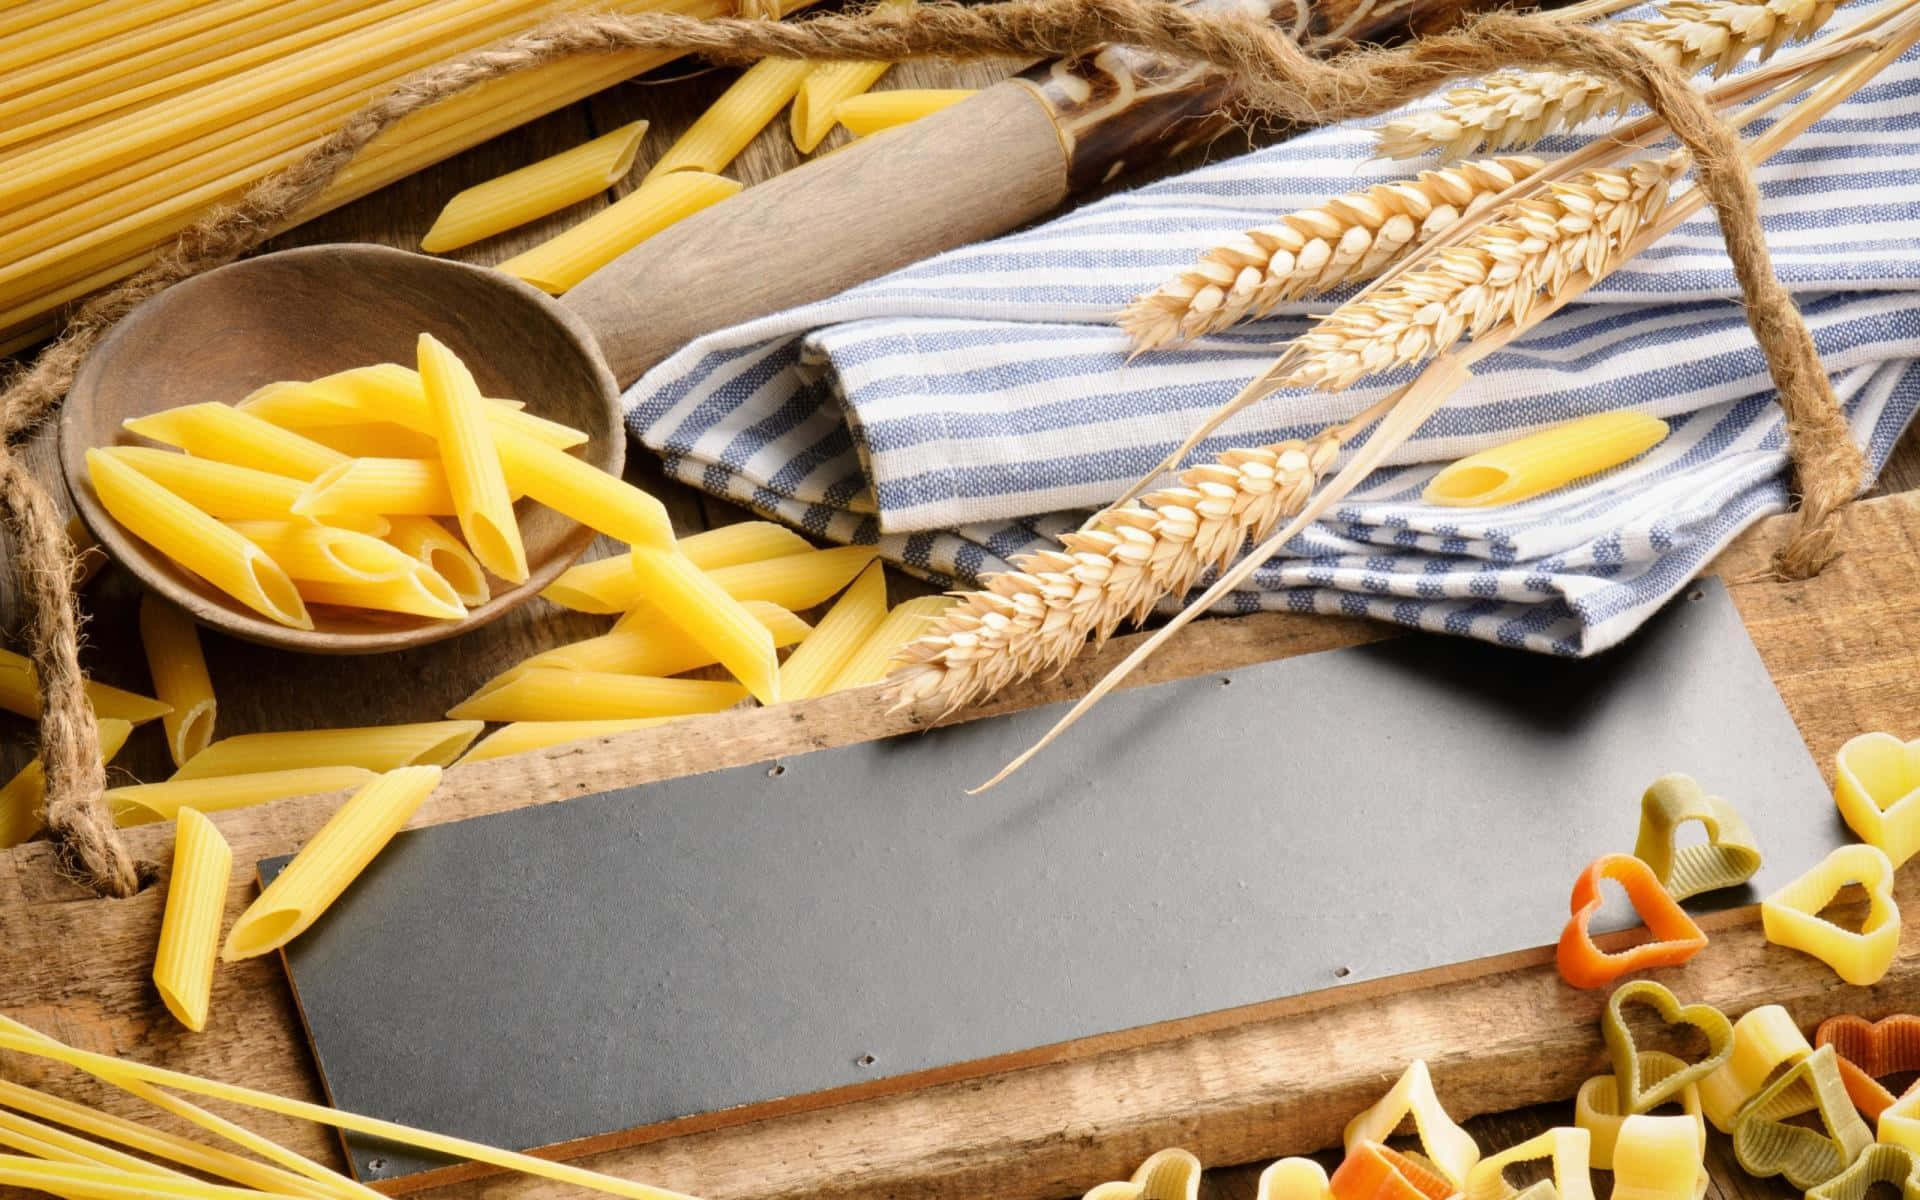 A Wooden Board With Pasta, Wheat And Other Items